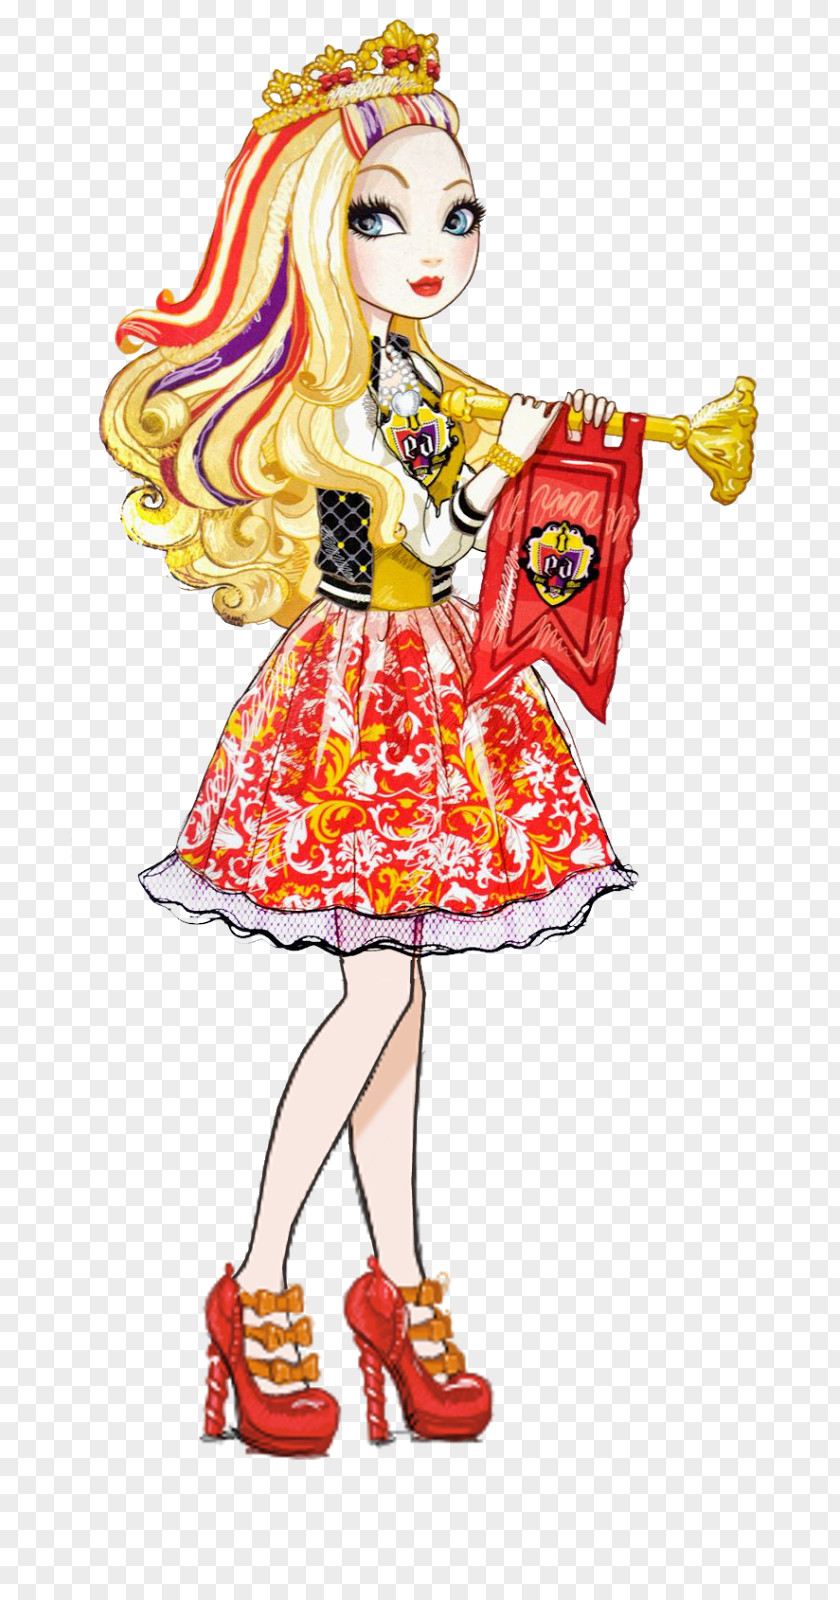 Toy Ever After High Legacy Day Apple White Doll Monster Clip Art PNG